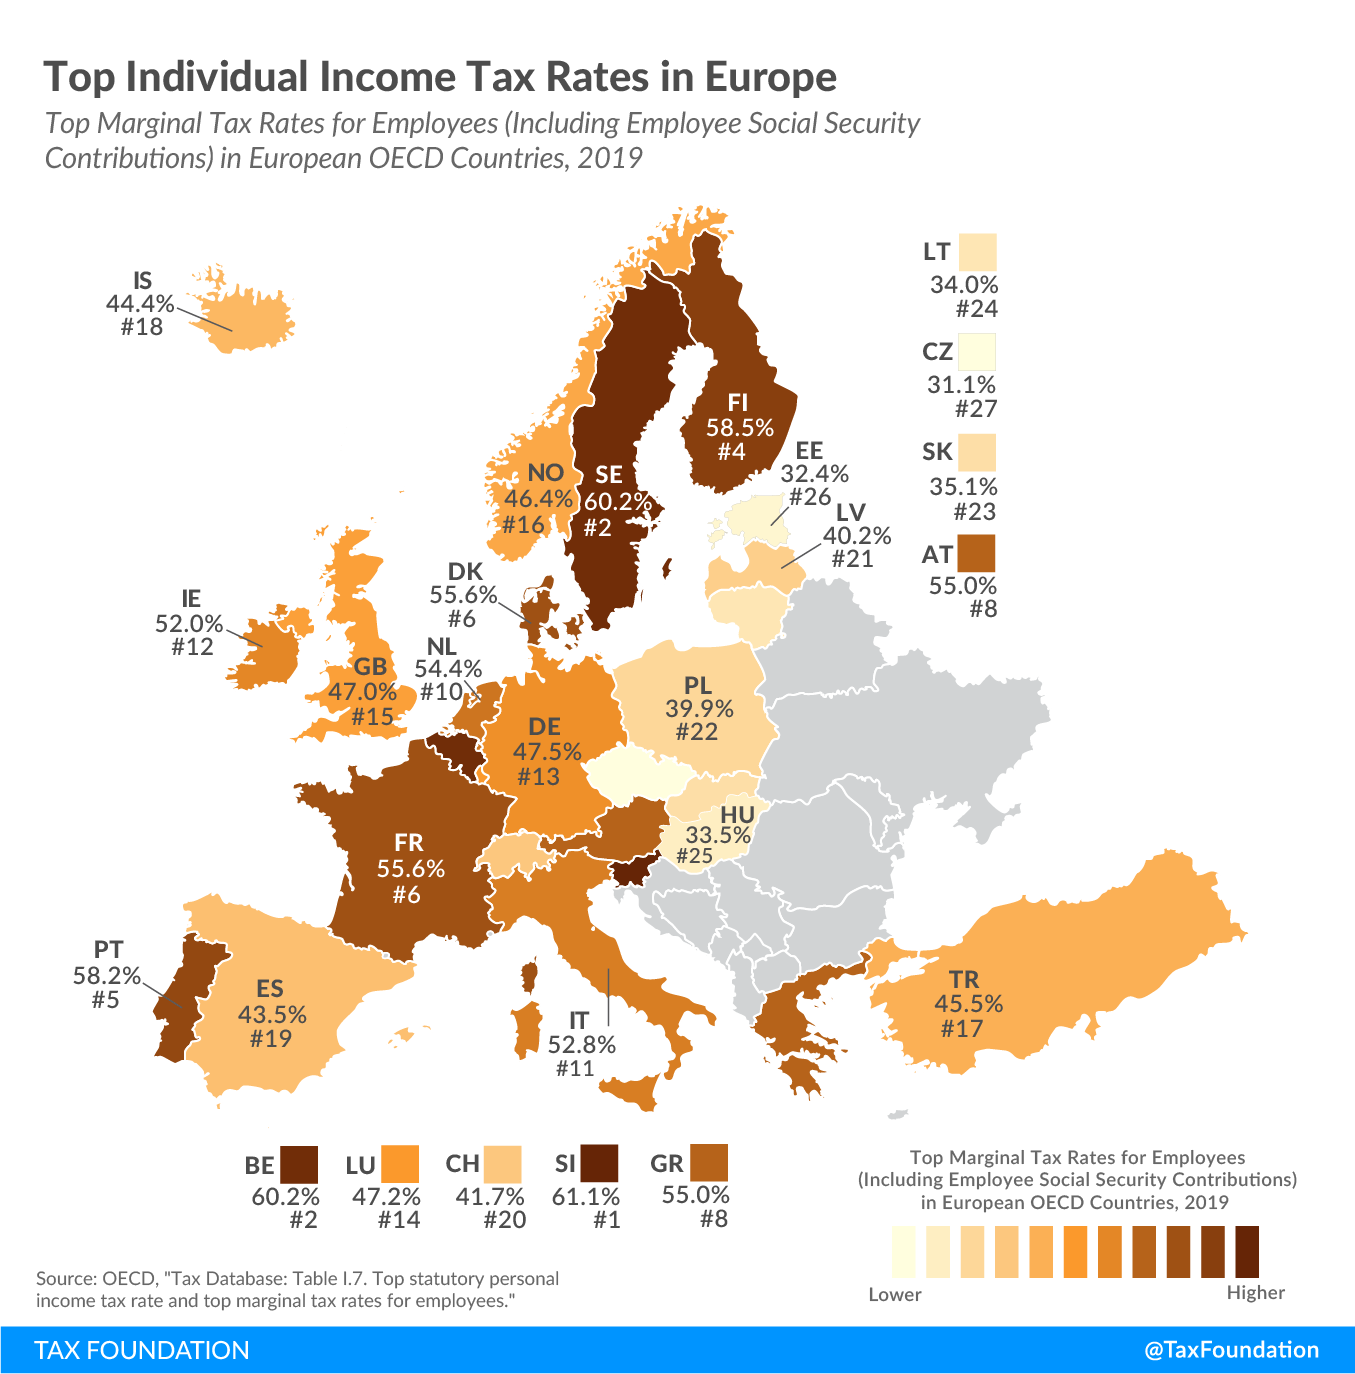 Top Individual Income Tax Rates in Europe, top marginal tax rates for employees (including employee social security contributions) in European OECD Countries